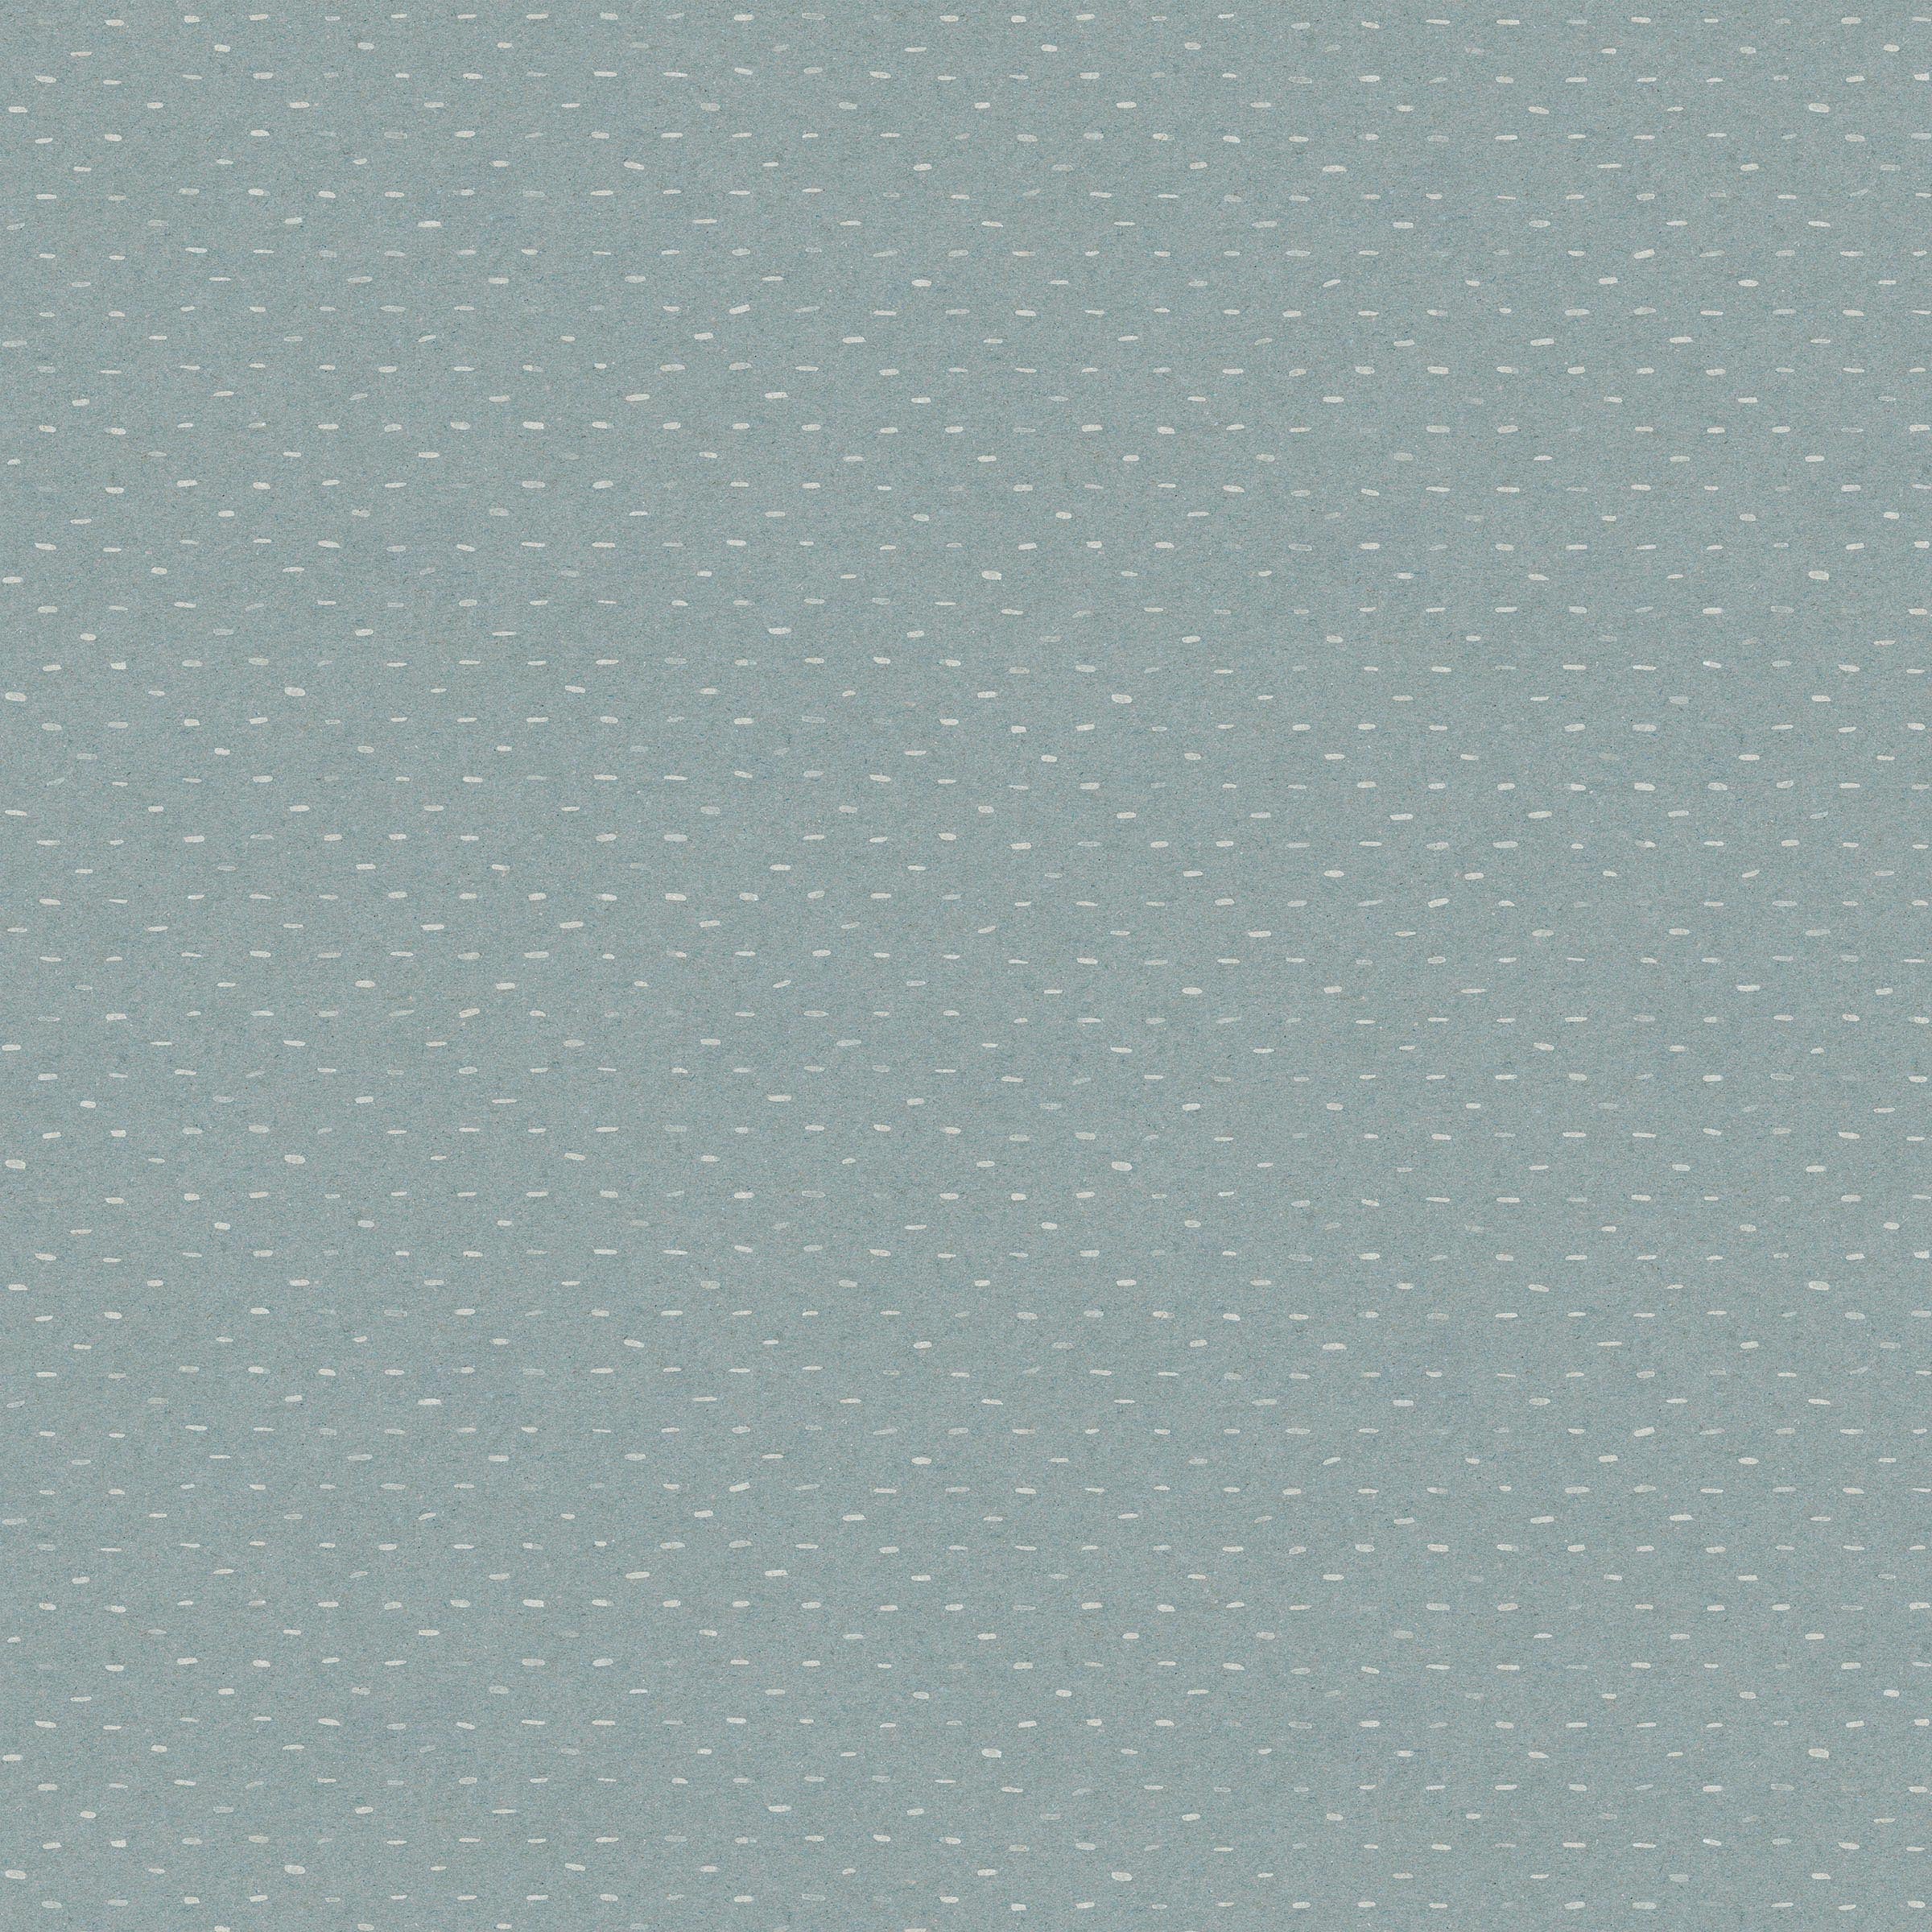 Detail of wallpaper in a dotted diamond grid in white on a blue field.